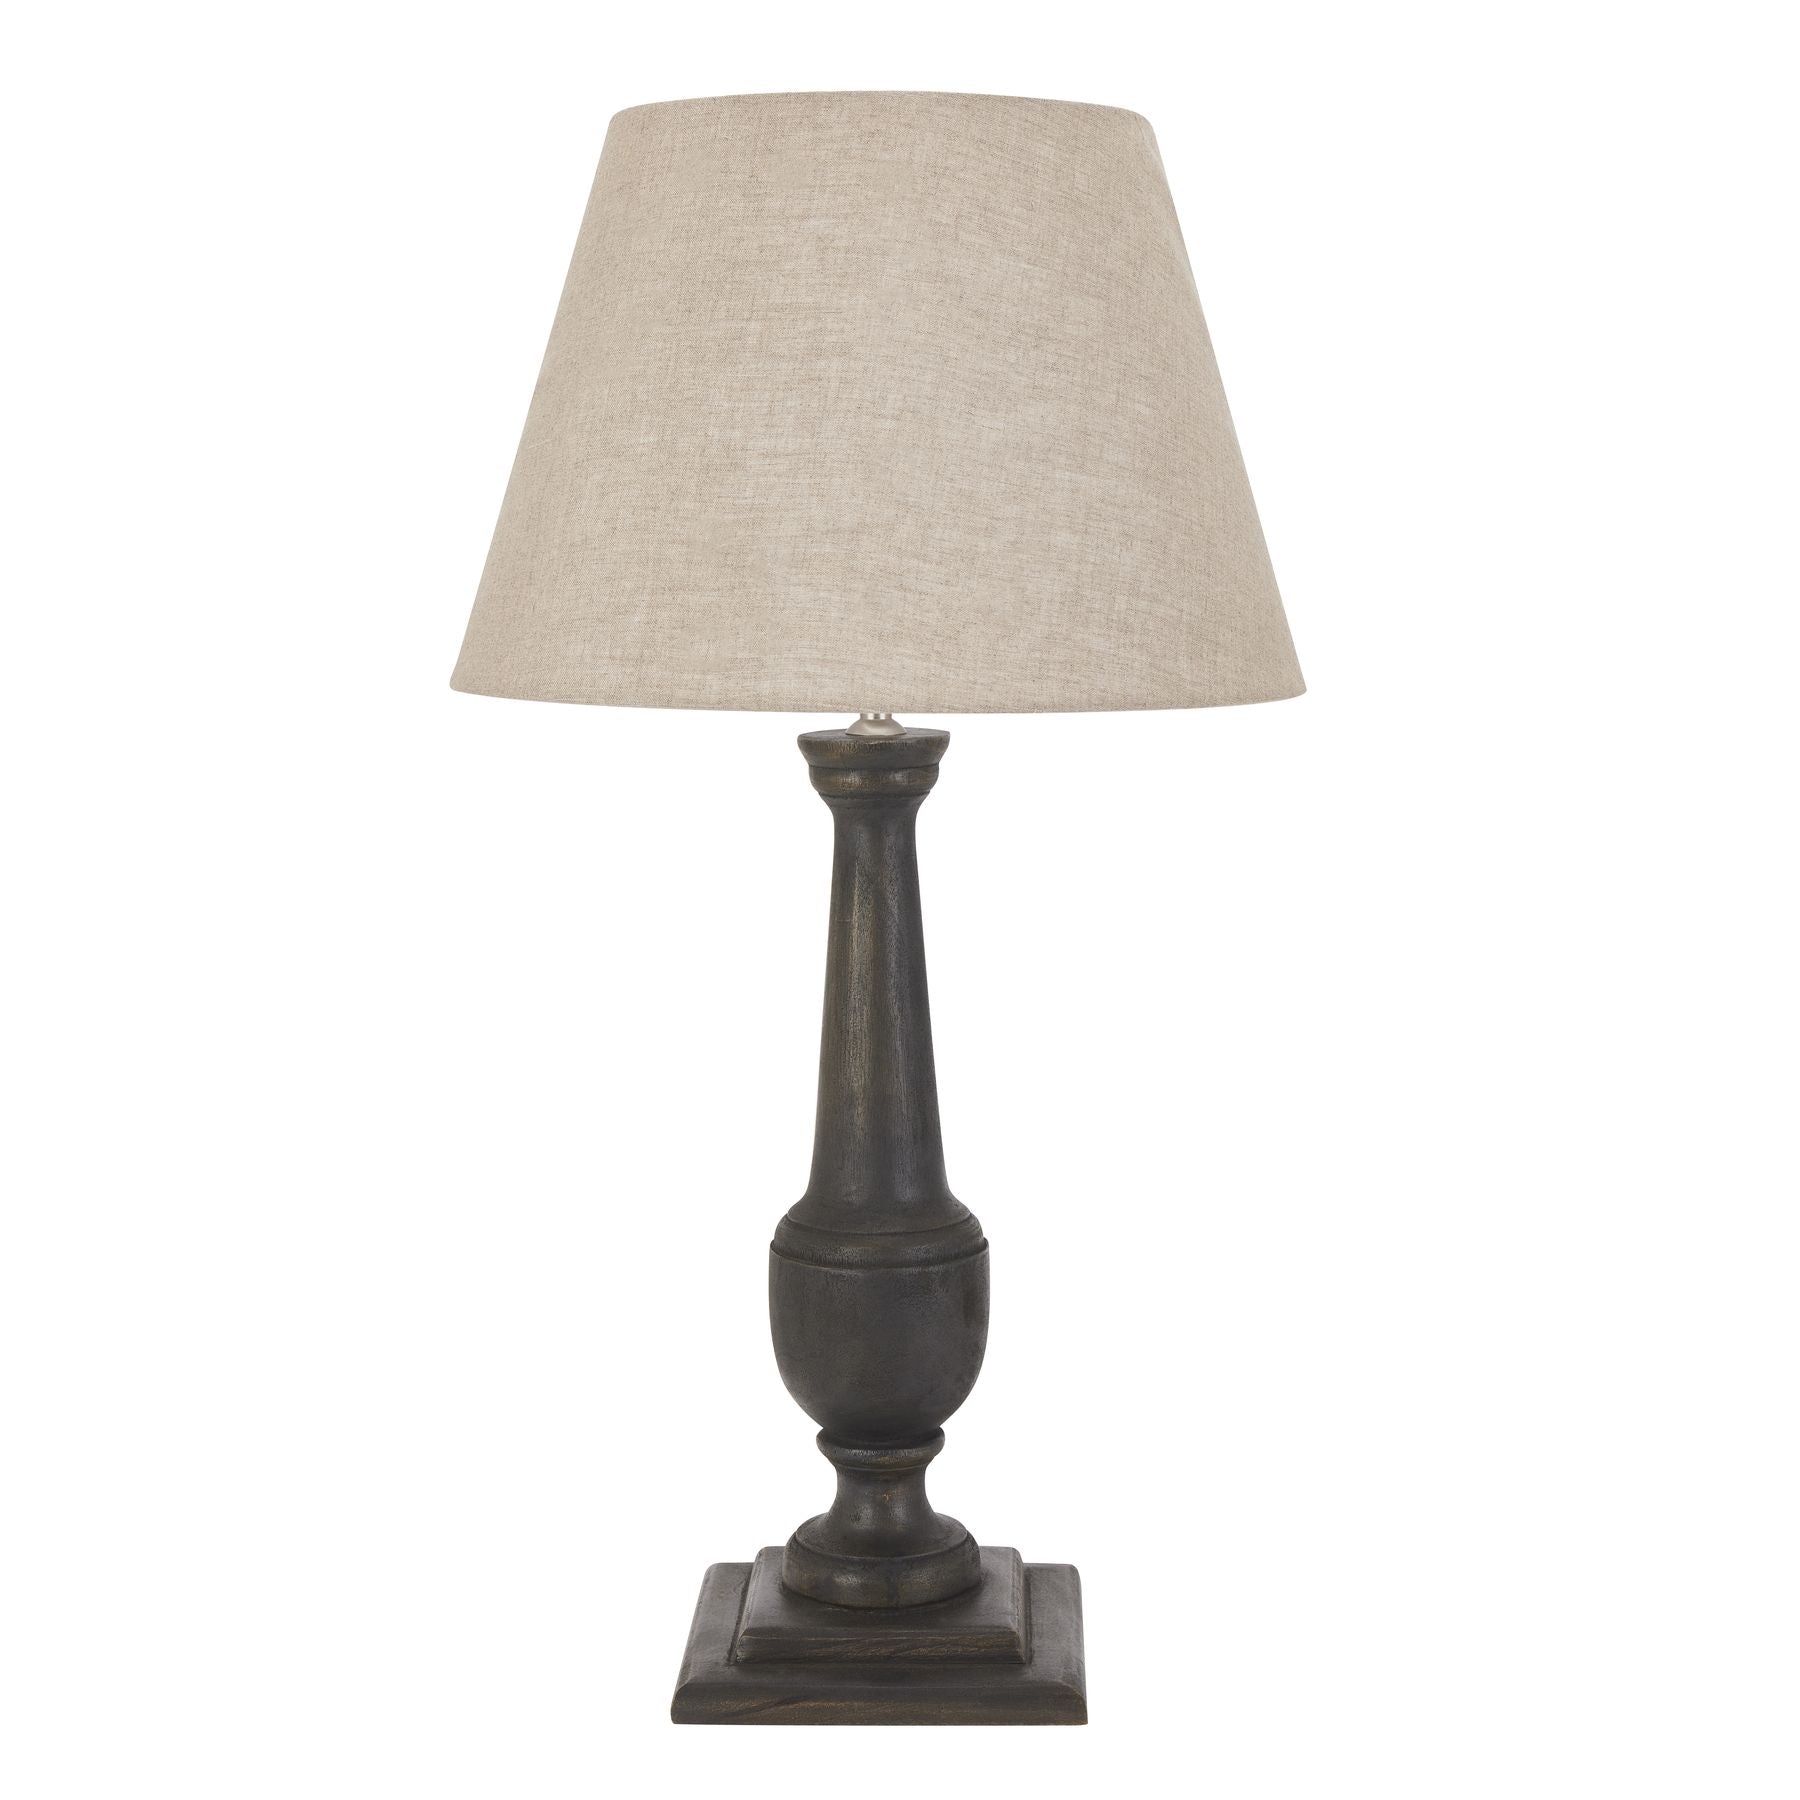 View Delaney Grey Goblet Candlestick Lamp With Linen Shade information